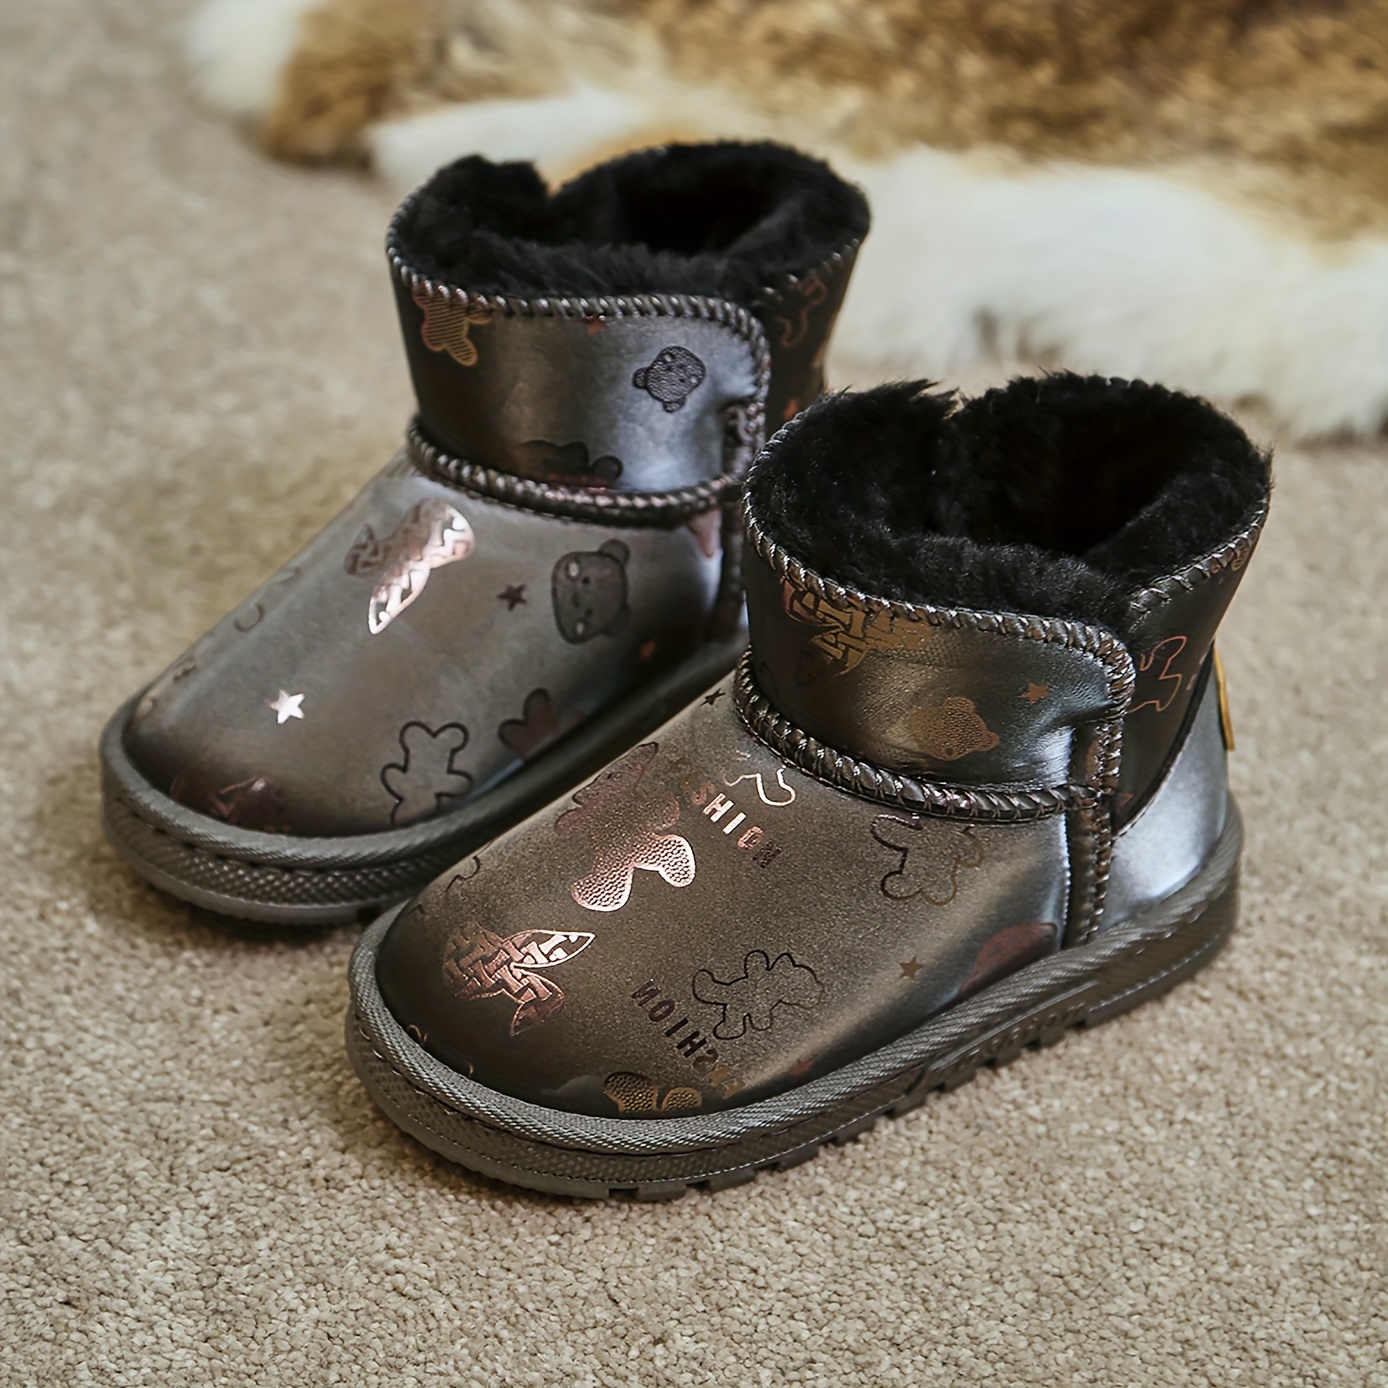 Moon Boots Kids & Baby Shoes